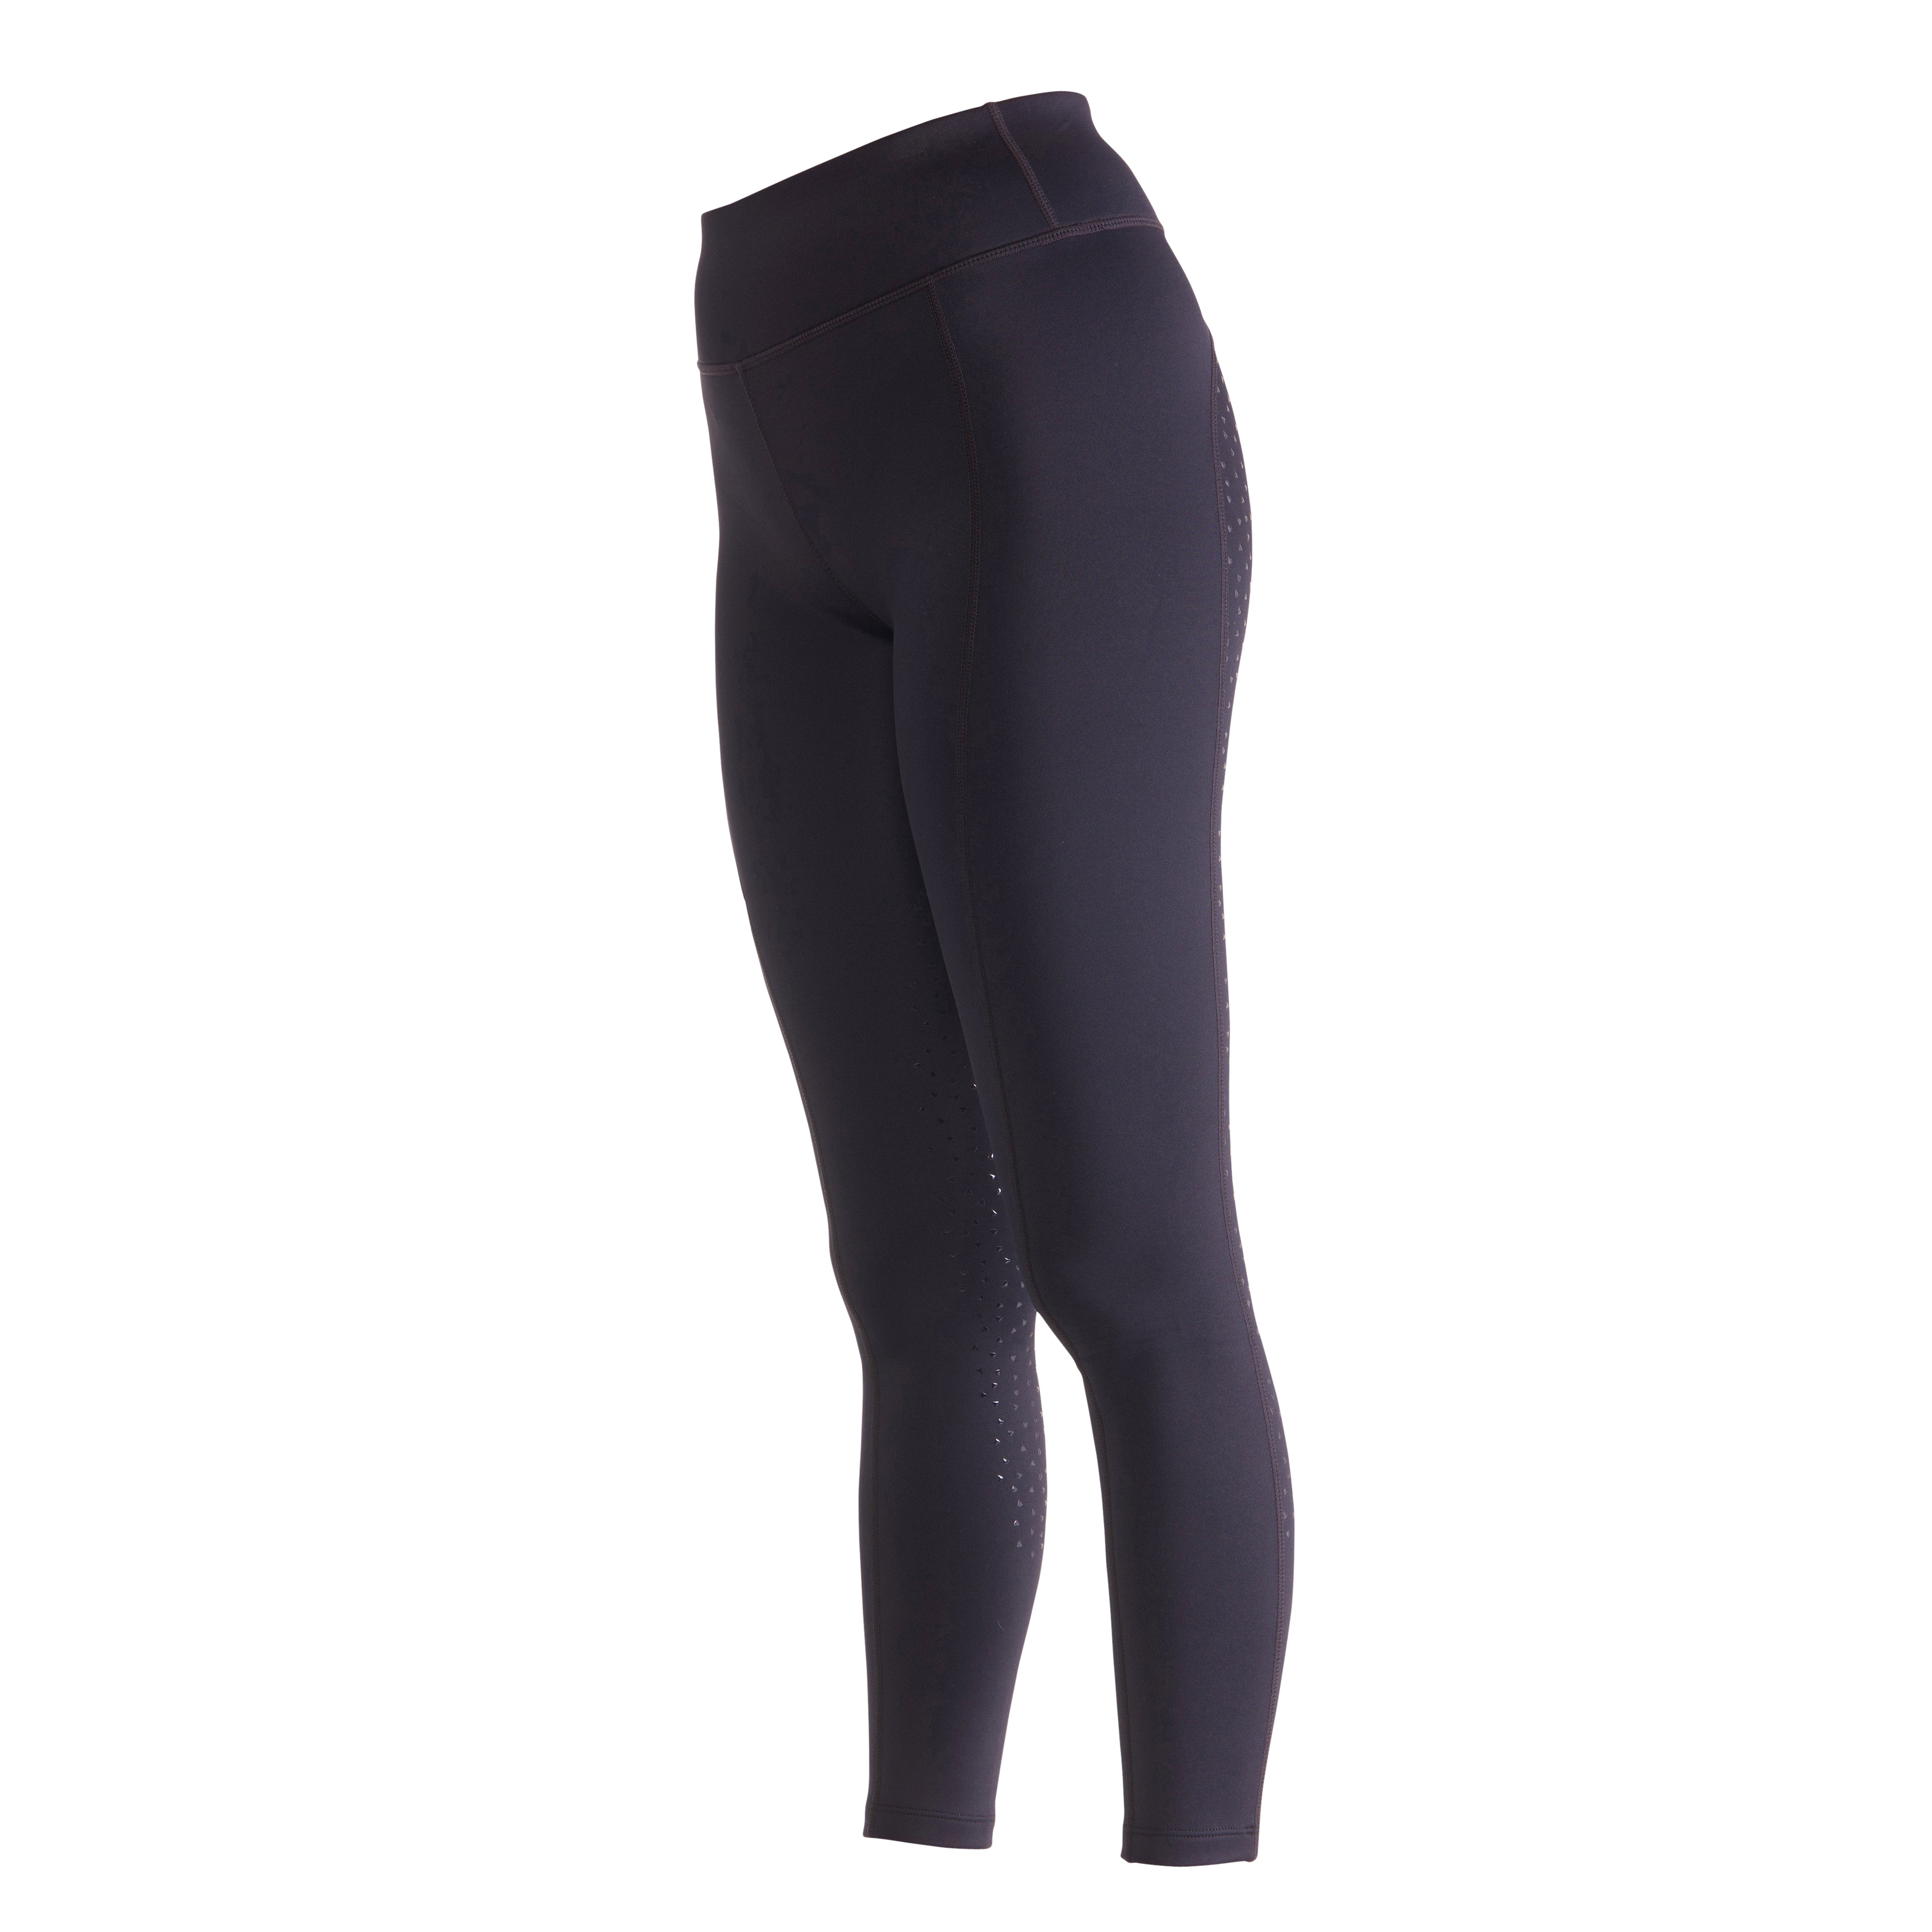 Shires Ladies Aubrion Shield Winter Riding Tights